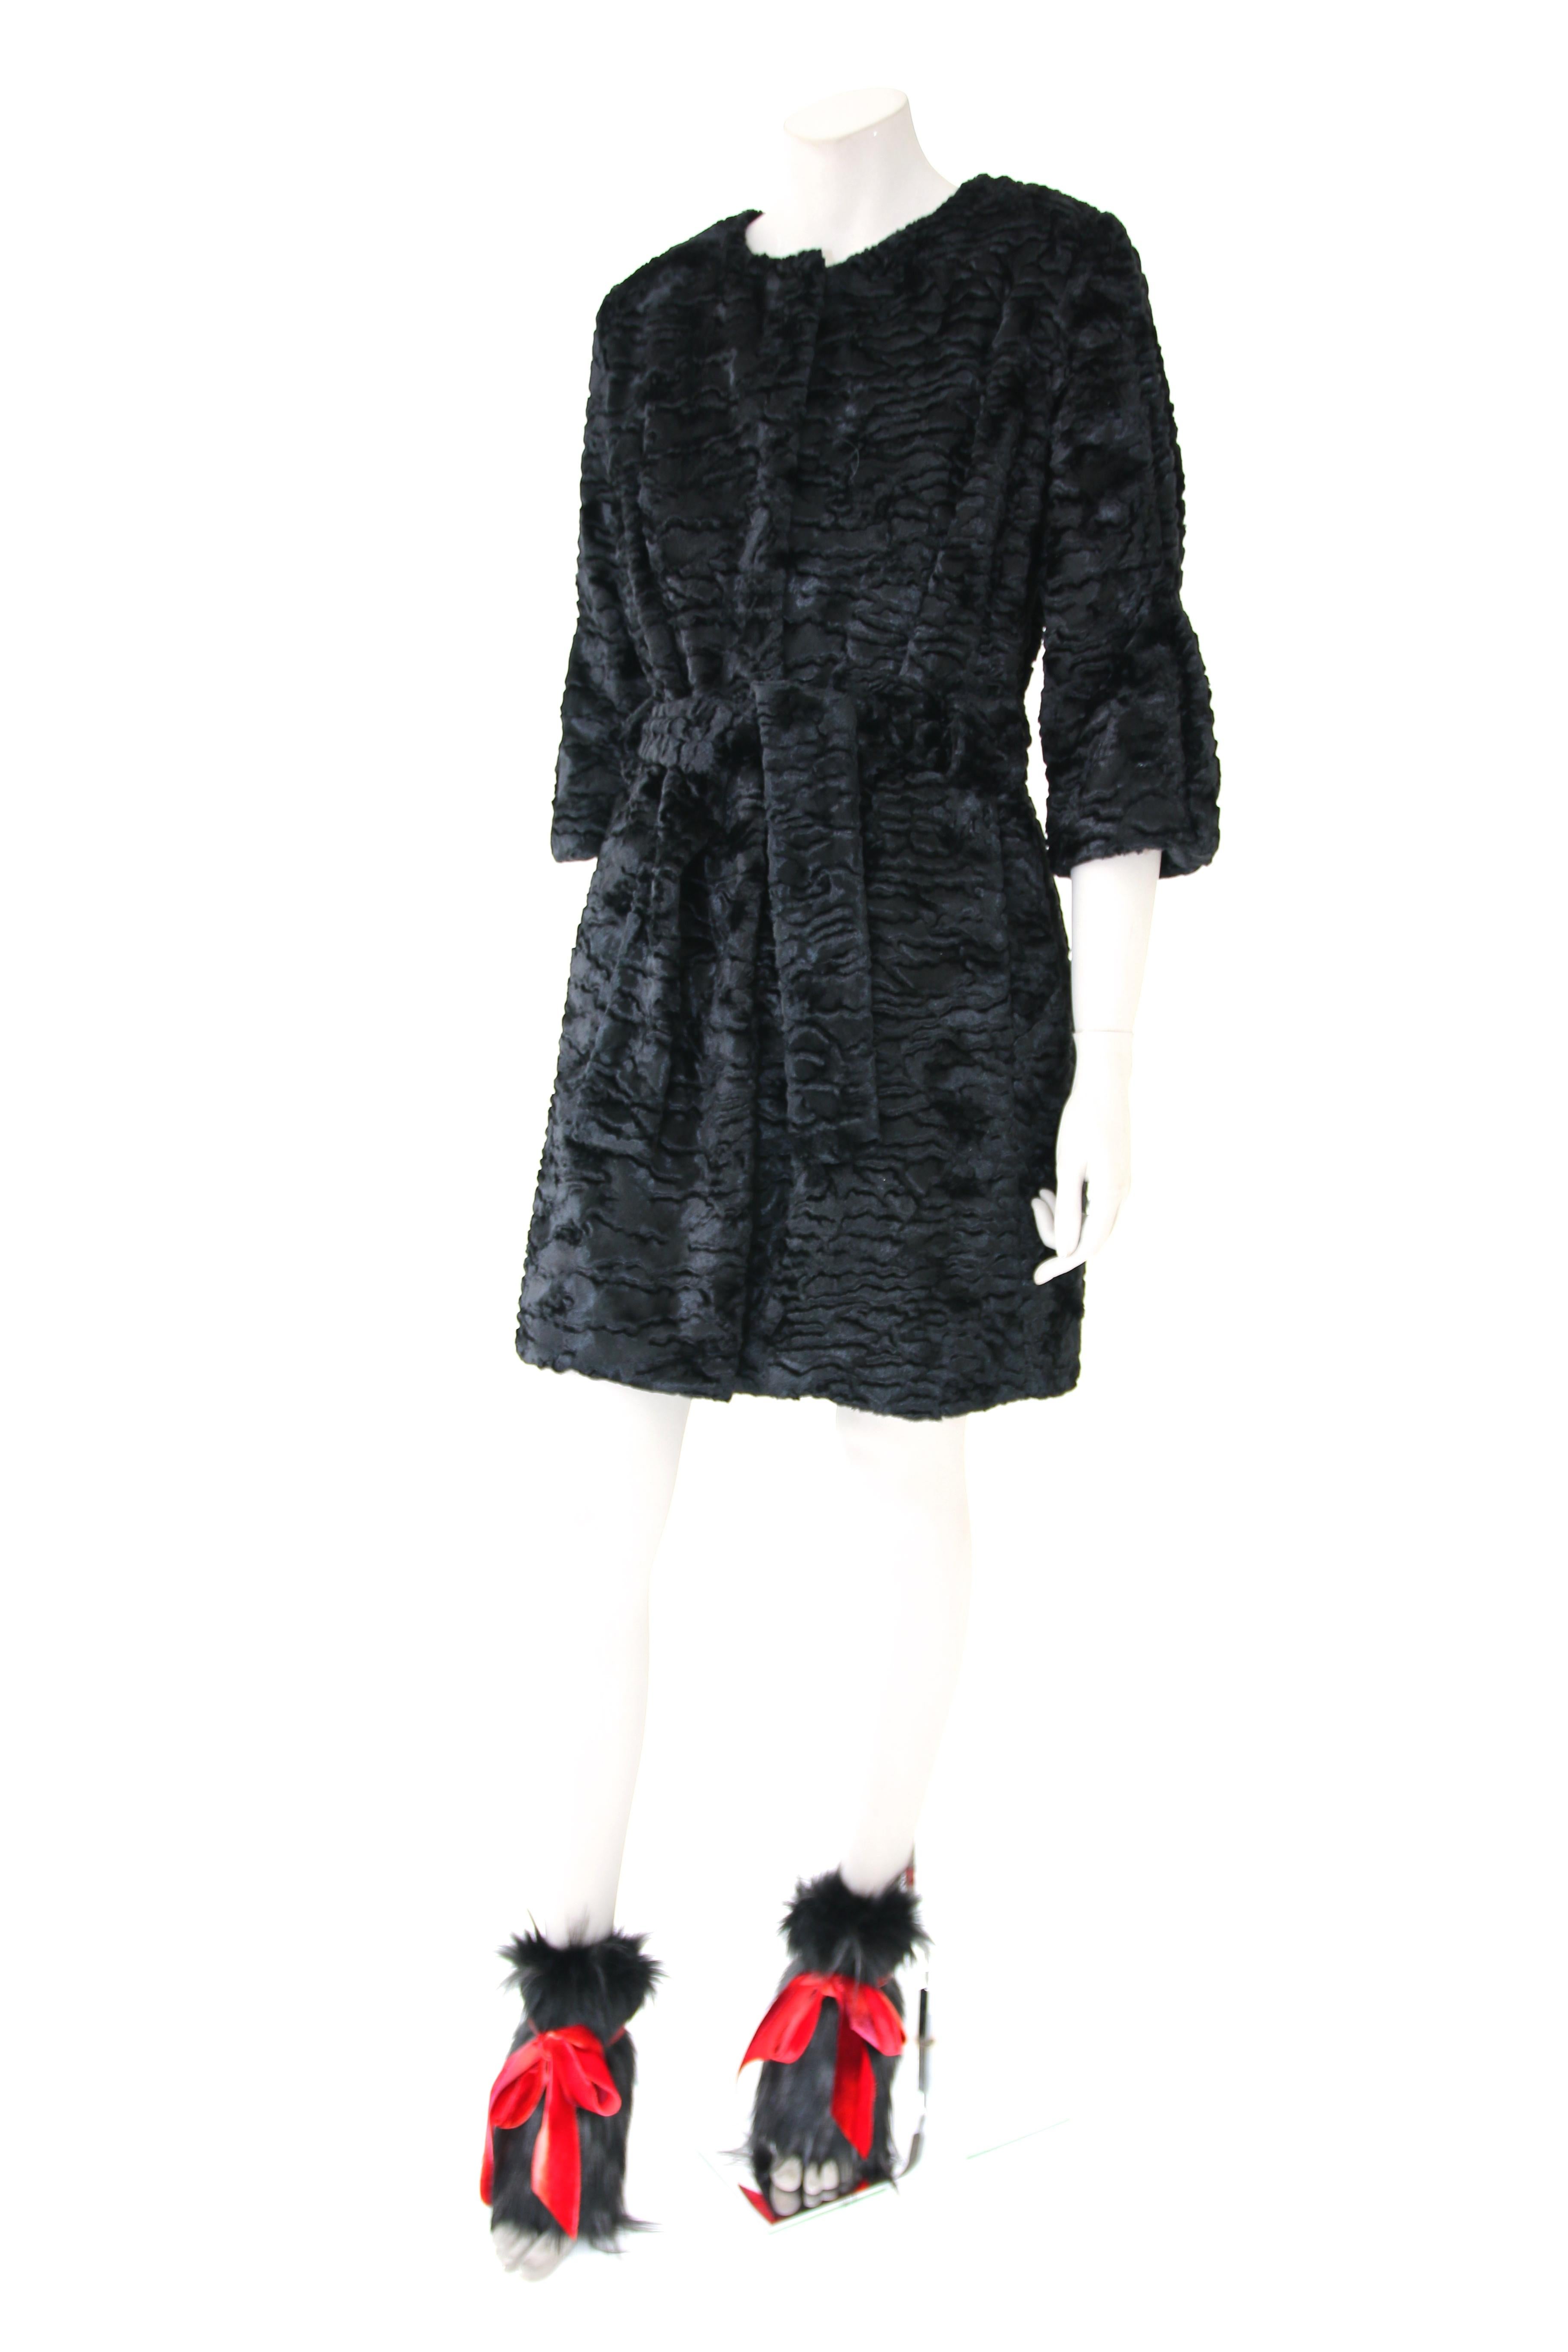 Pelush Black Astrakhan Faux Fur Coat With Belt - Small -  (1/M Available) In New Condition For Sale In Greenwich, CT